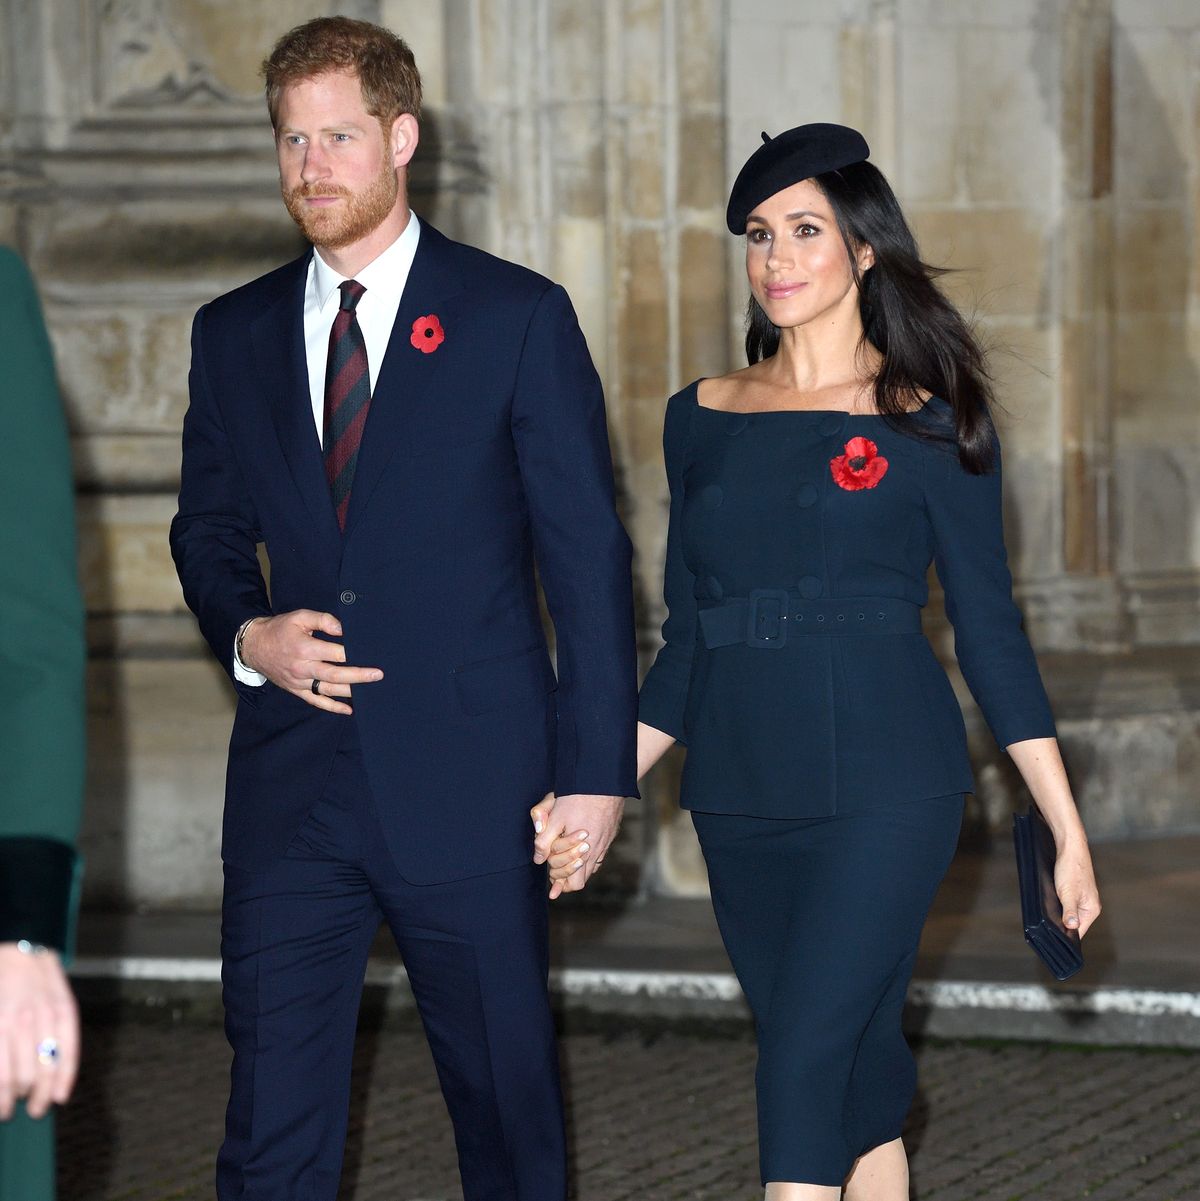 london, england november 11 prince harry, duke of sussex and meghan, duchess of sussex attend the centenary of the armistice service at westminster abbey on november 11, 2018 in london, england photo by karwai tangwireimage